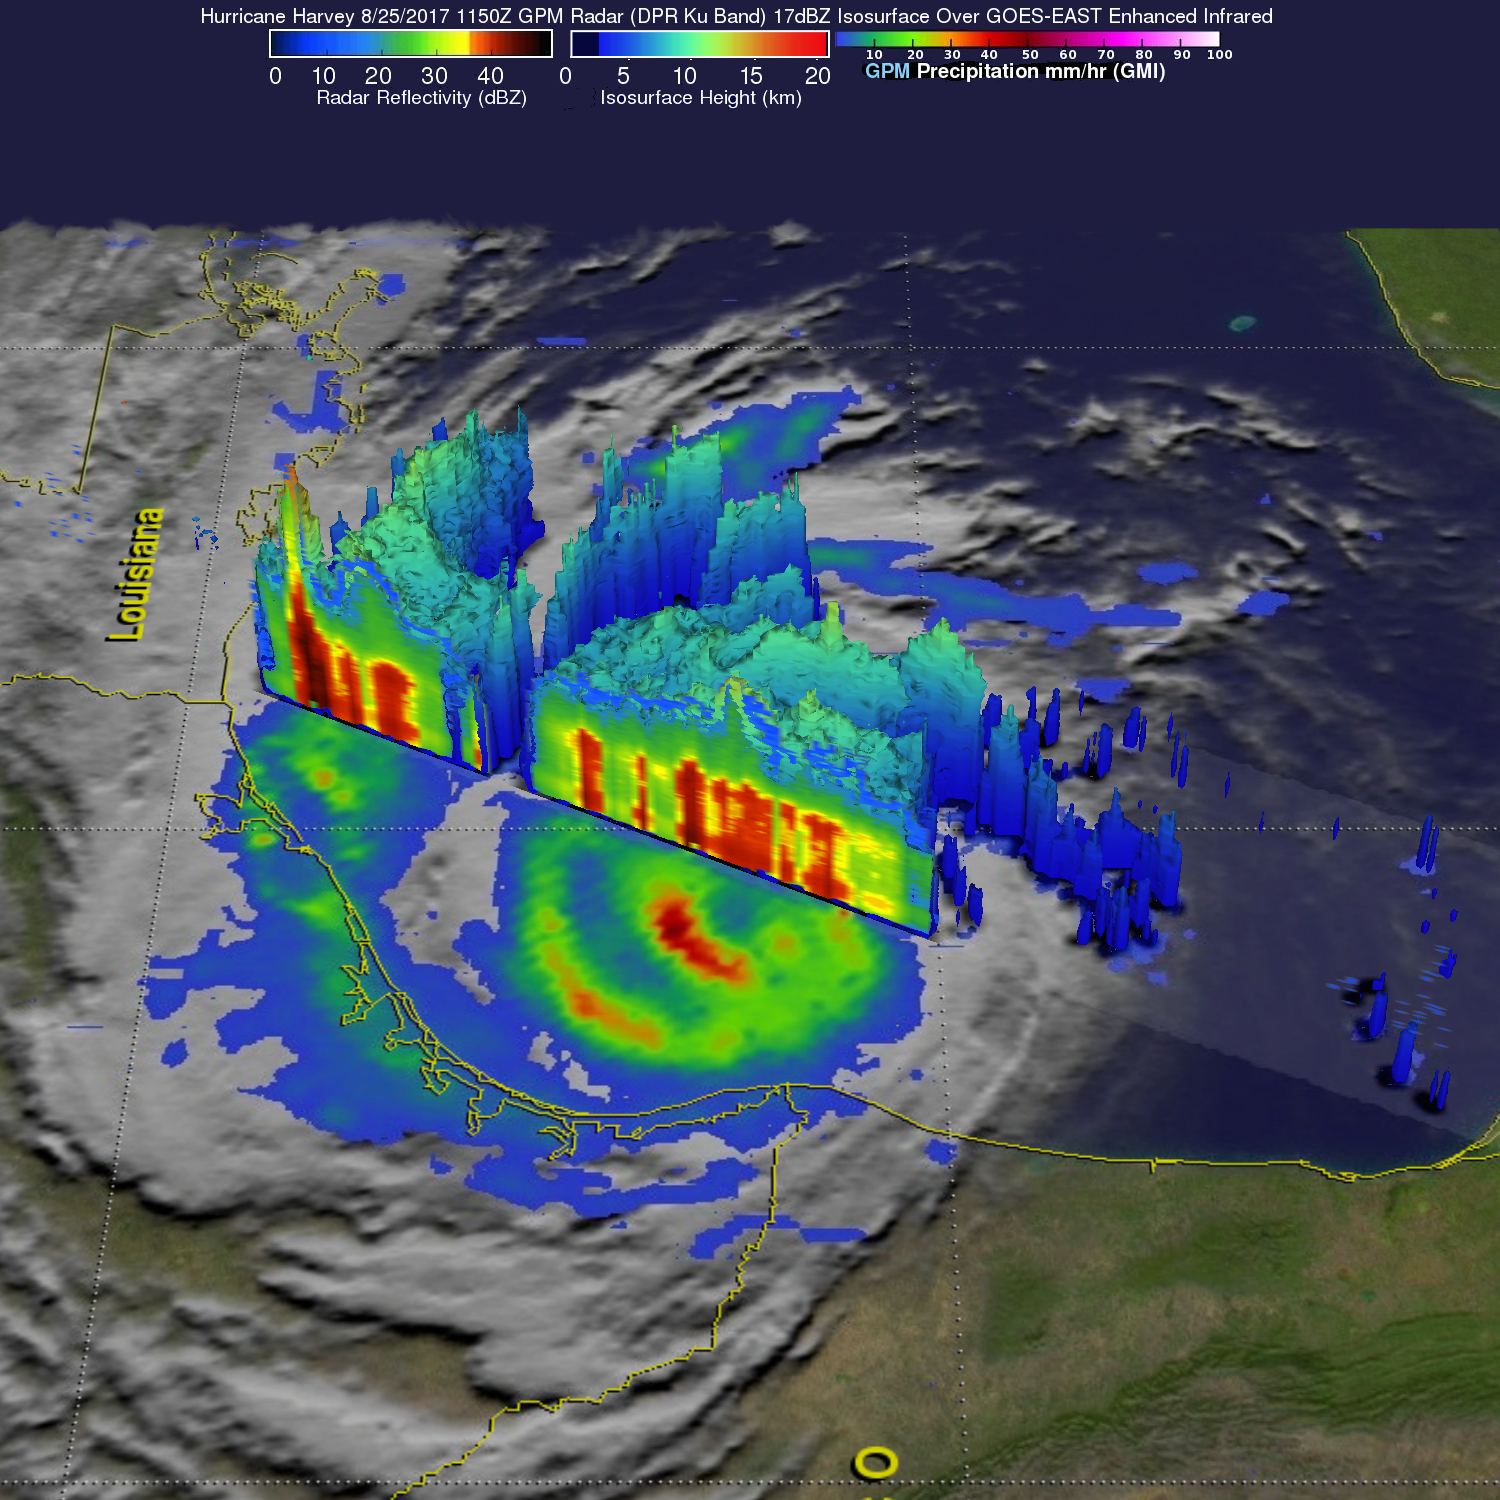 Satellite image of Harvey with clouds in 3D, colored to indicate rainfall rates.